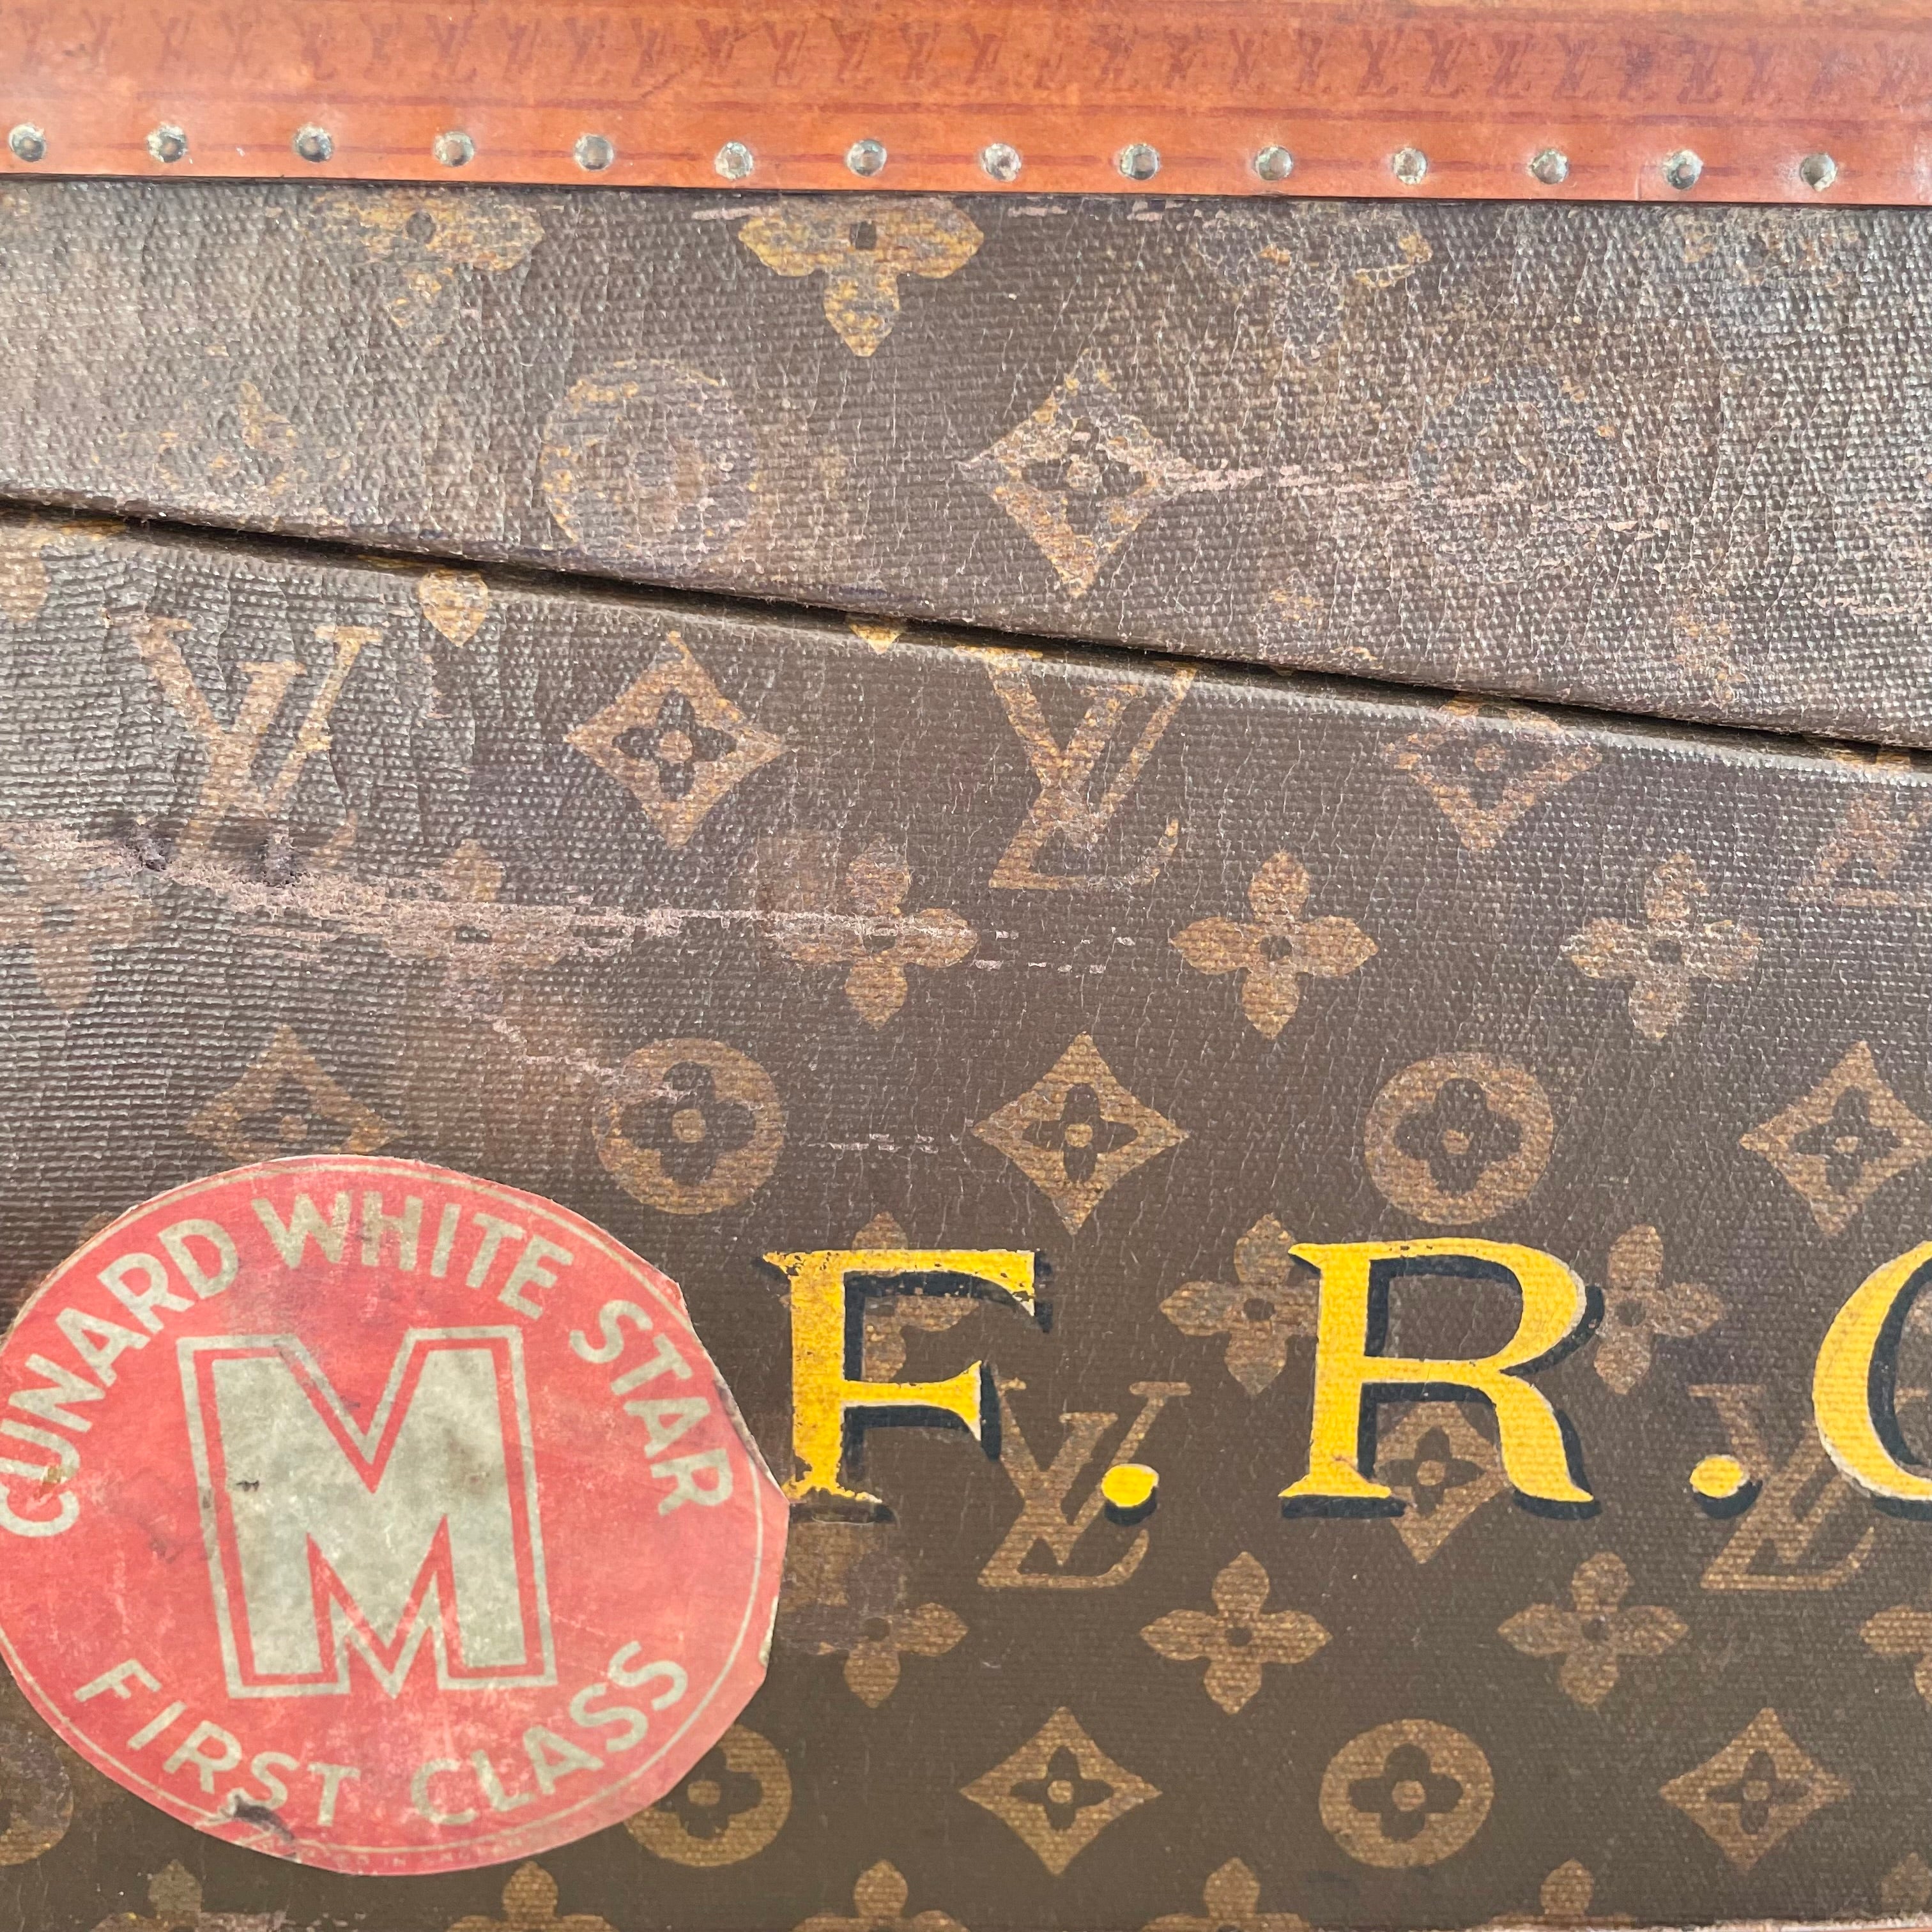 2 FAB LOUIS VUITTON SHOE BAGS TLV 44 20 THE FRENCH COMPANY WITH LABELS